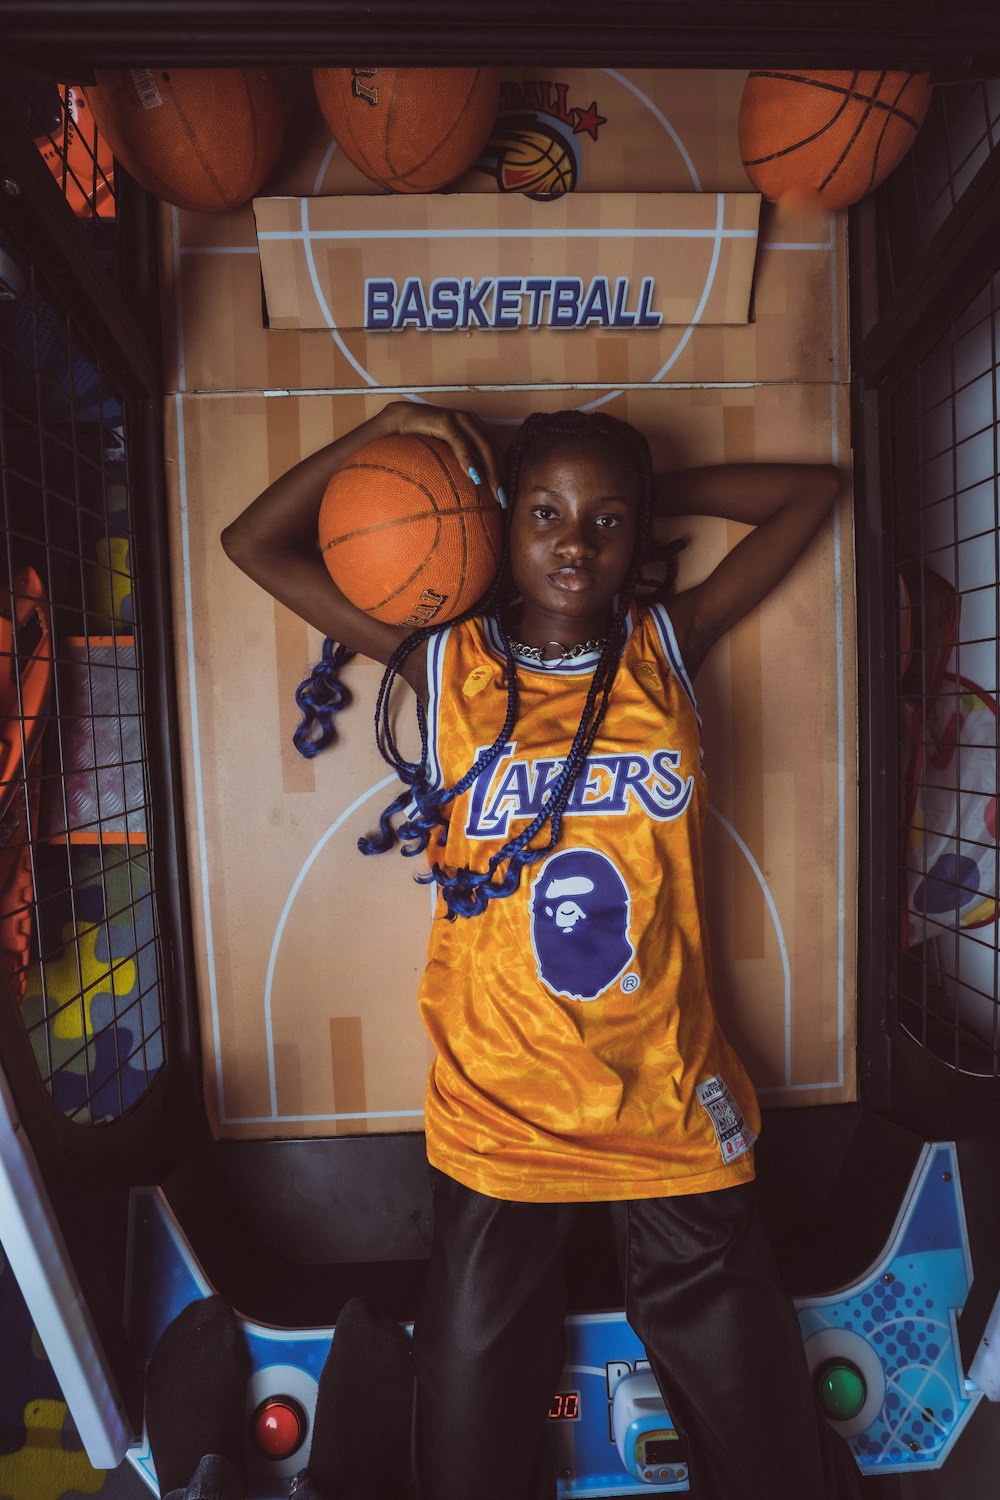 a young girl in a basketball uniform posing for a picture